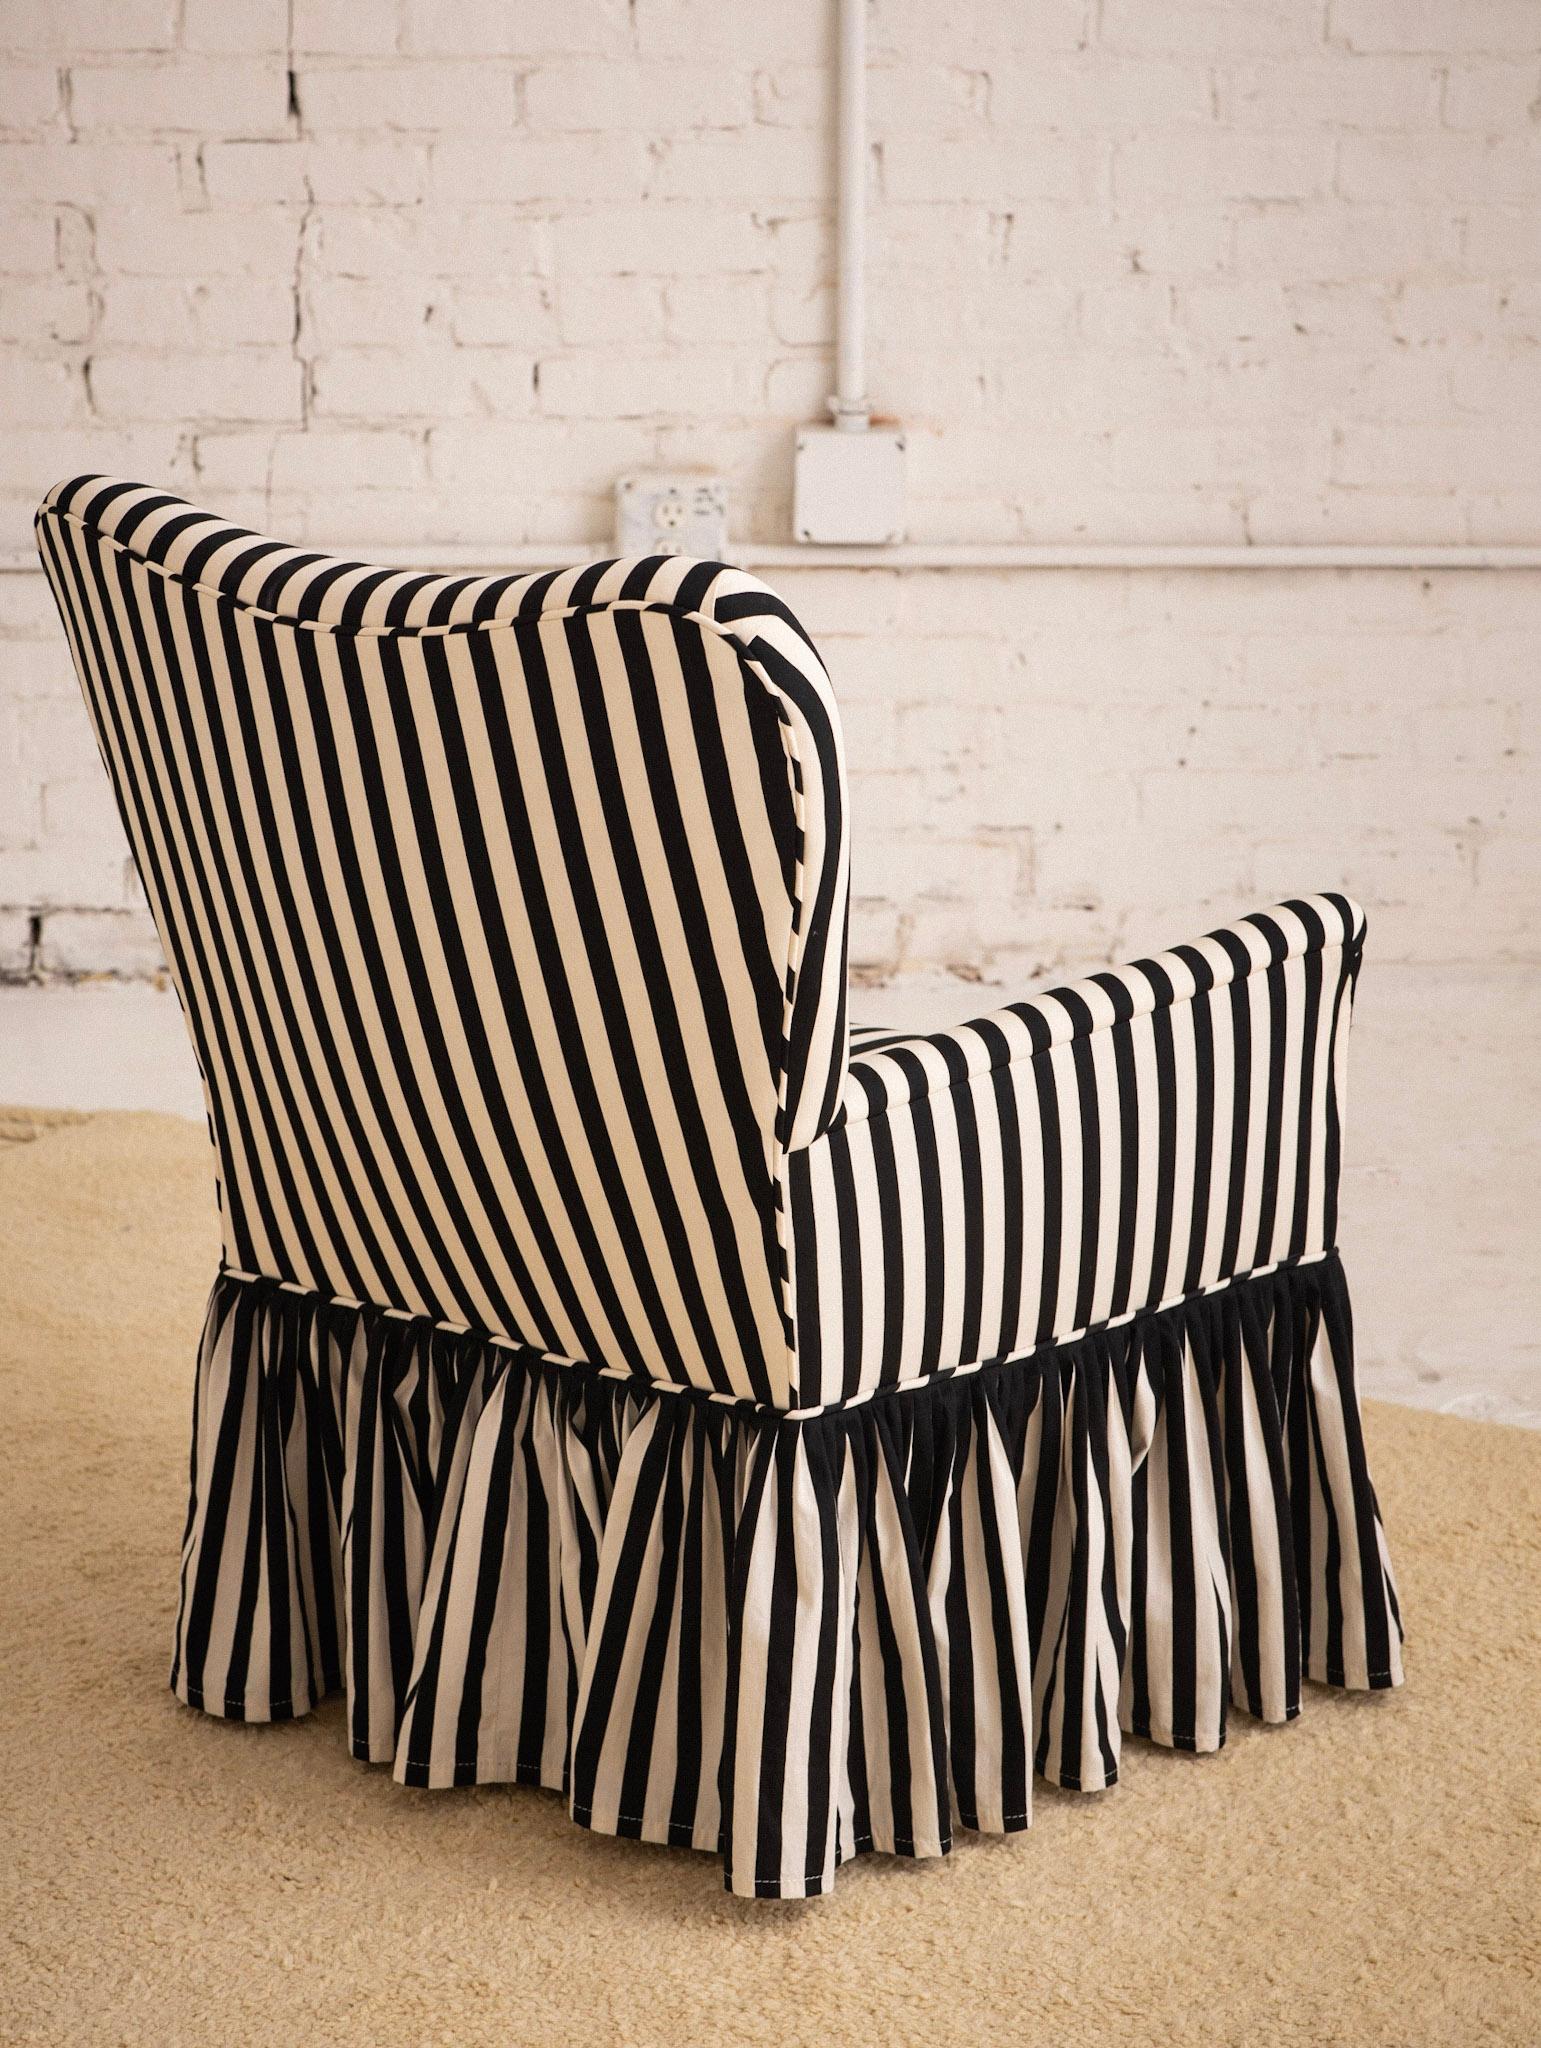 20th Century Mid Century Accent Chair in Black and White Stripe with Ruffle Skirt